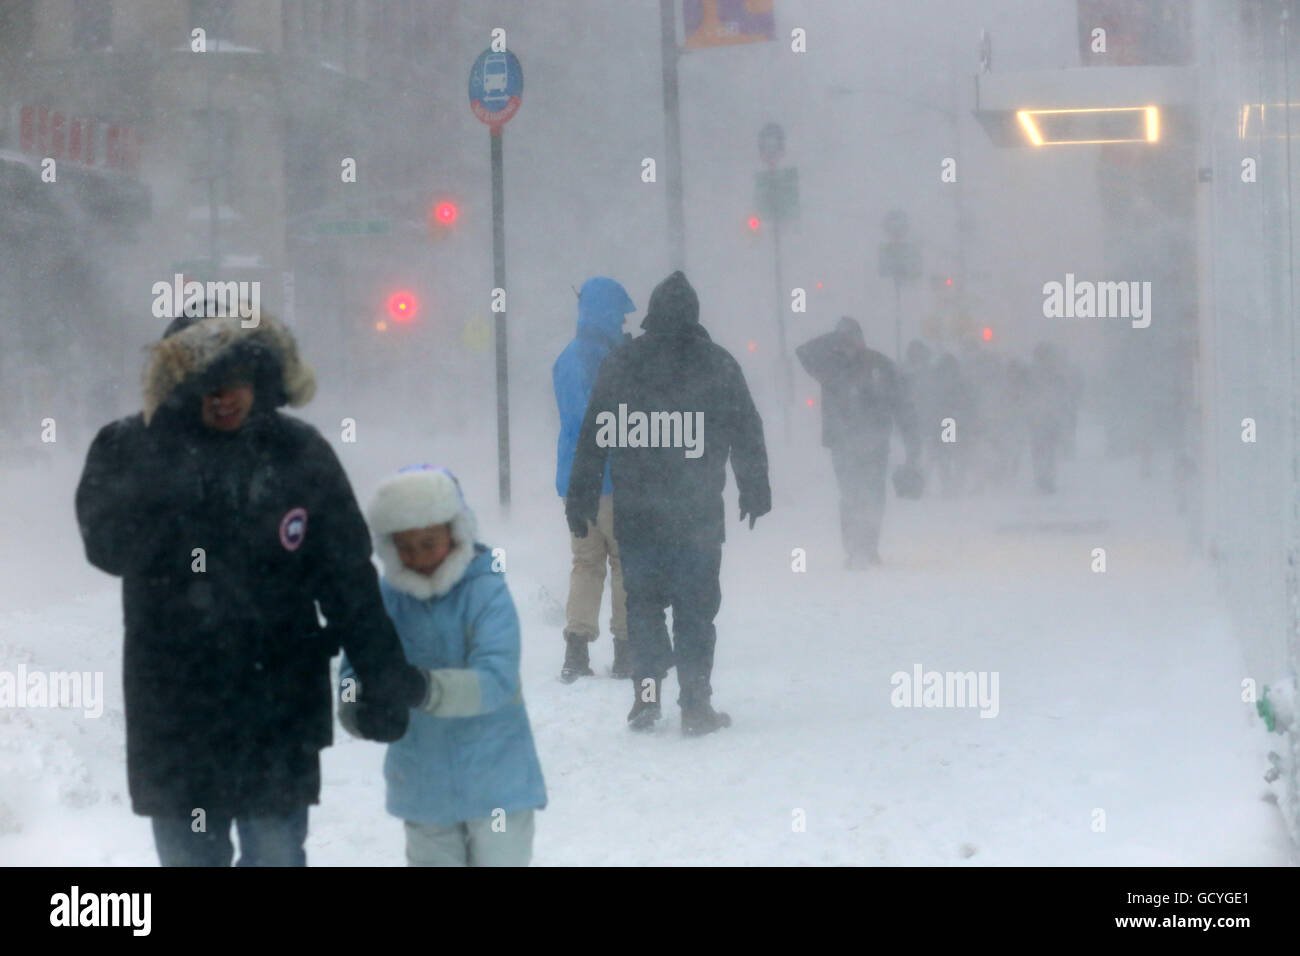 People brace themselves against high winds and heavy snow during the Winter Blizzard of 2016, New York City, January 23, 2016. snow squall snow storm Stock Photo